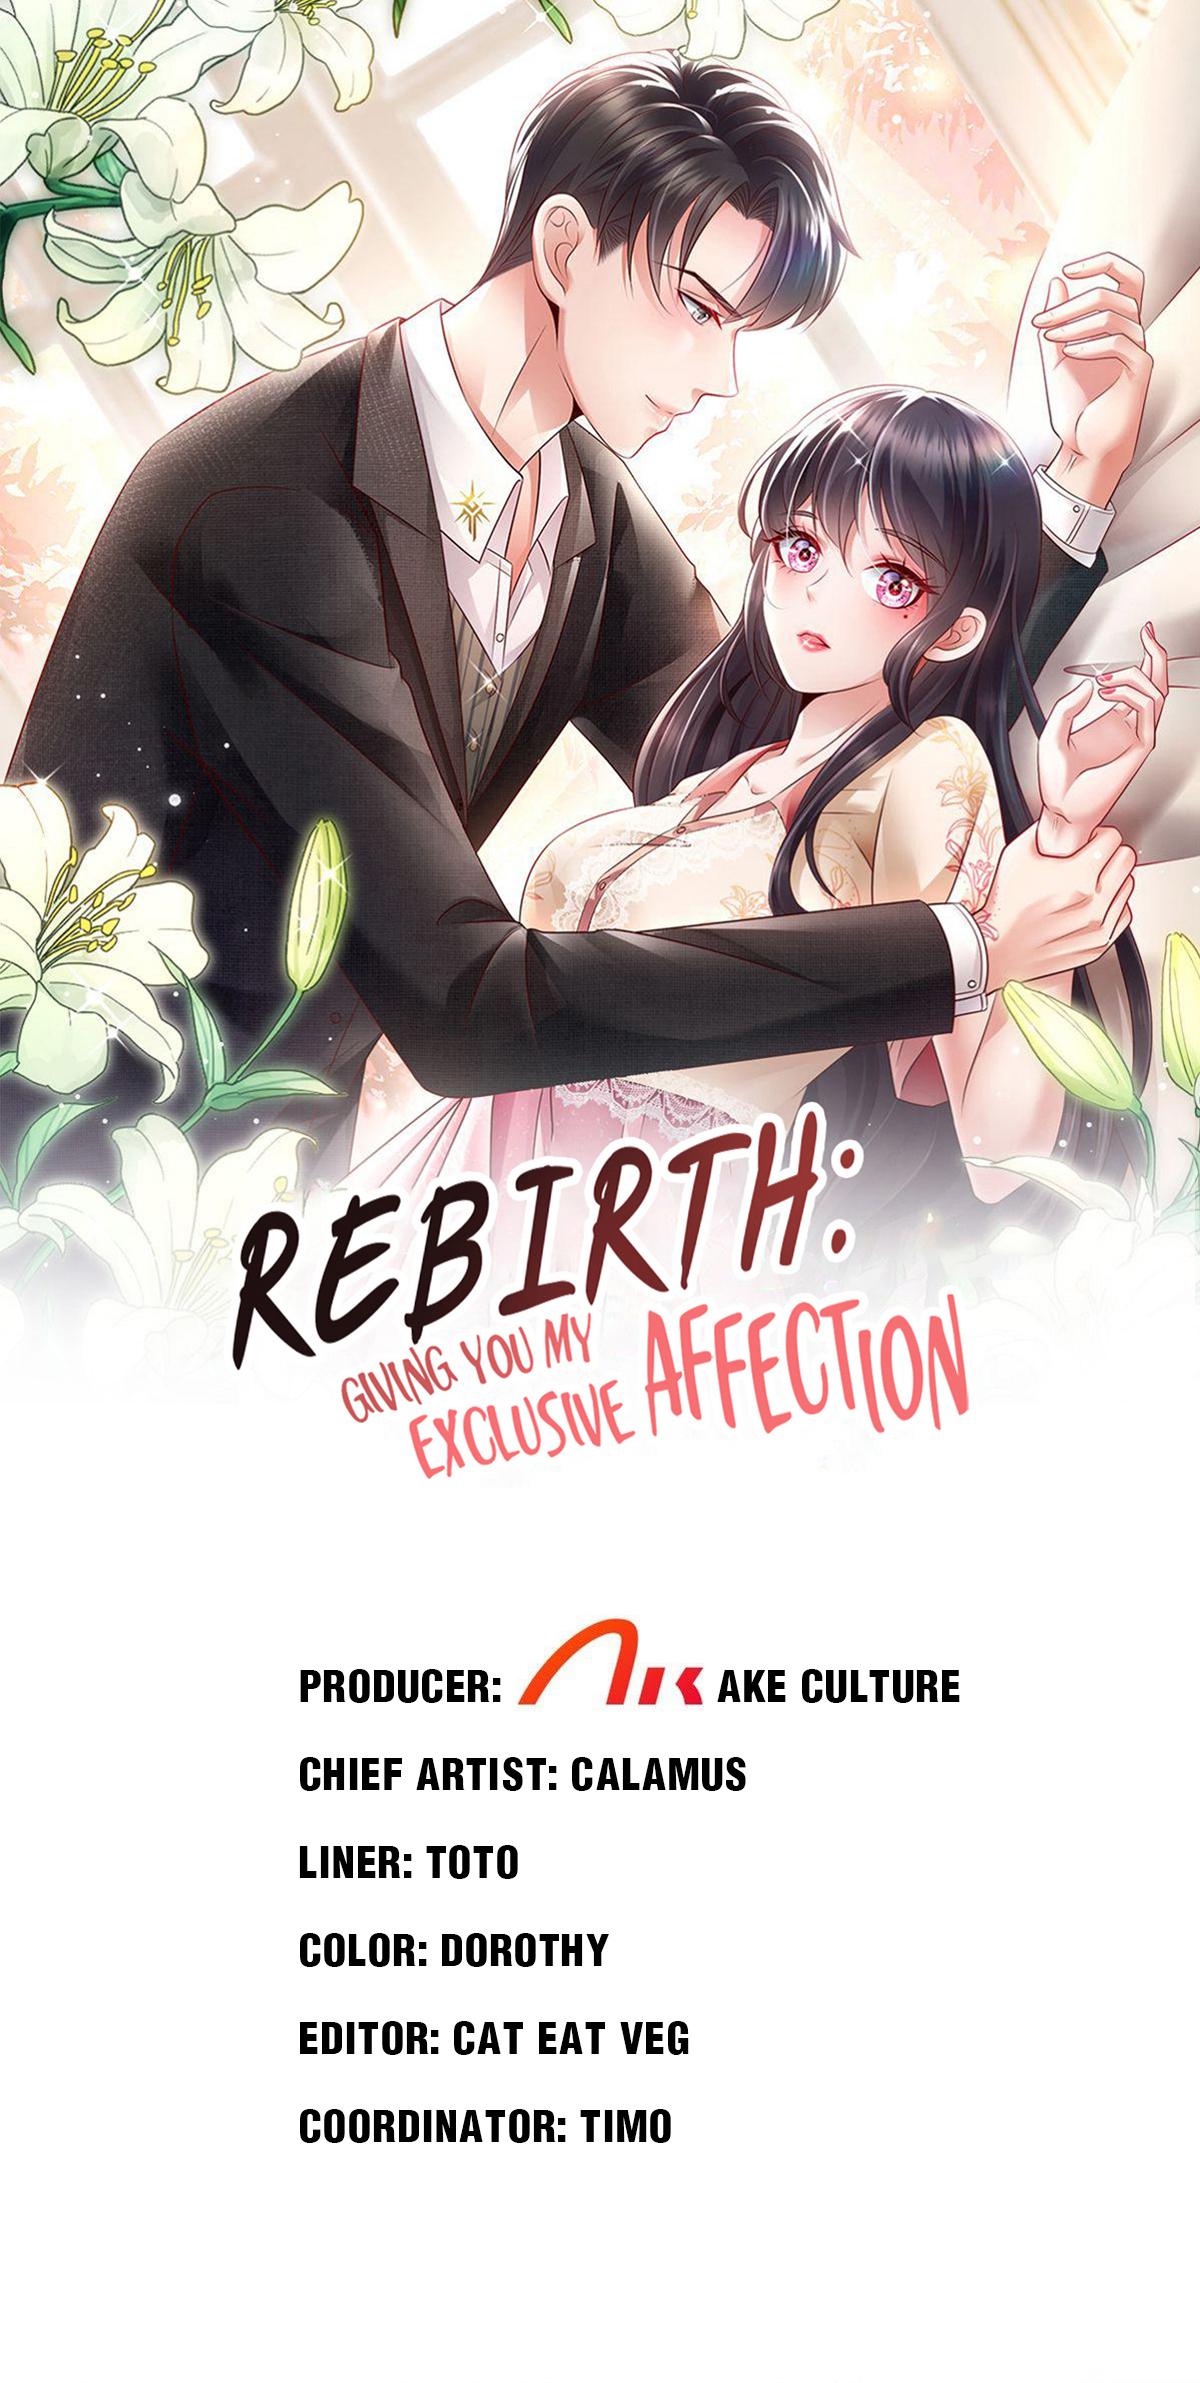 Rebirth: Giving You My Exclusive Affection 143